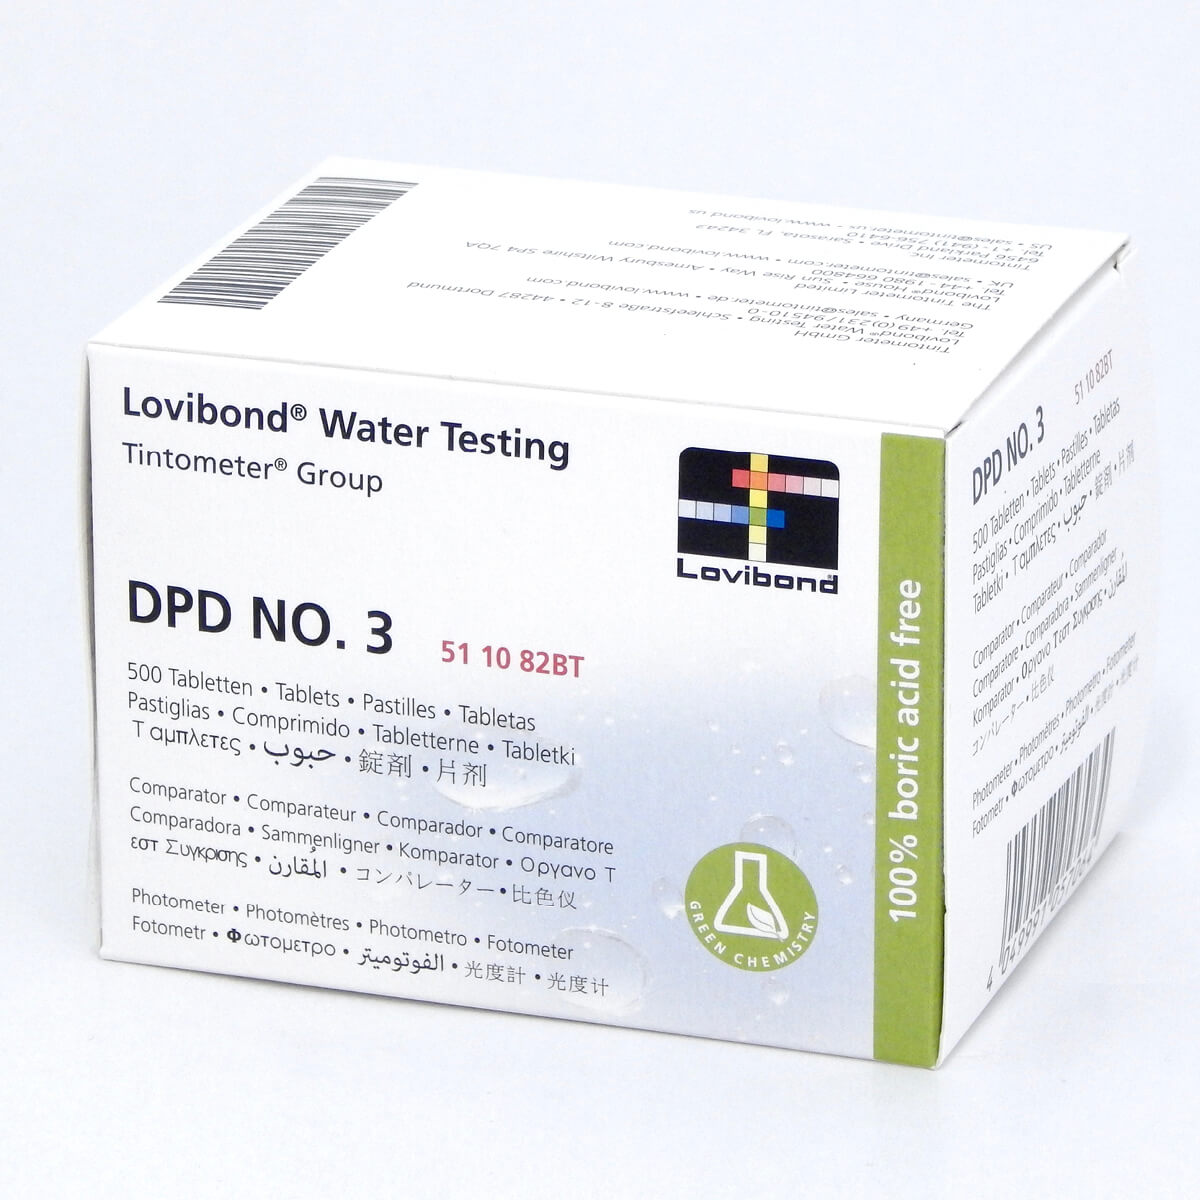 Lovibond® tablets DPD 3 in a pack of 500 pcs, slowly soluble, for the determination of total chlorine Lovibond® tablets DPD 3 in a pack of 500 pcs, slowly soluble, for the determination of total chlorine